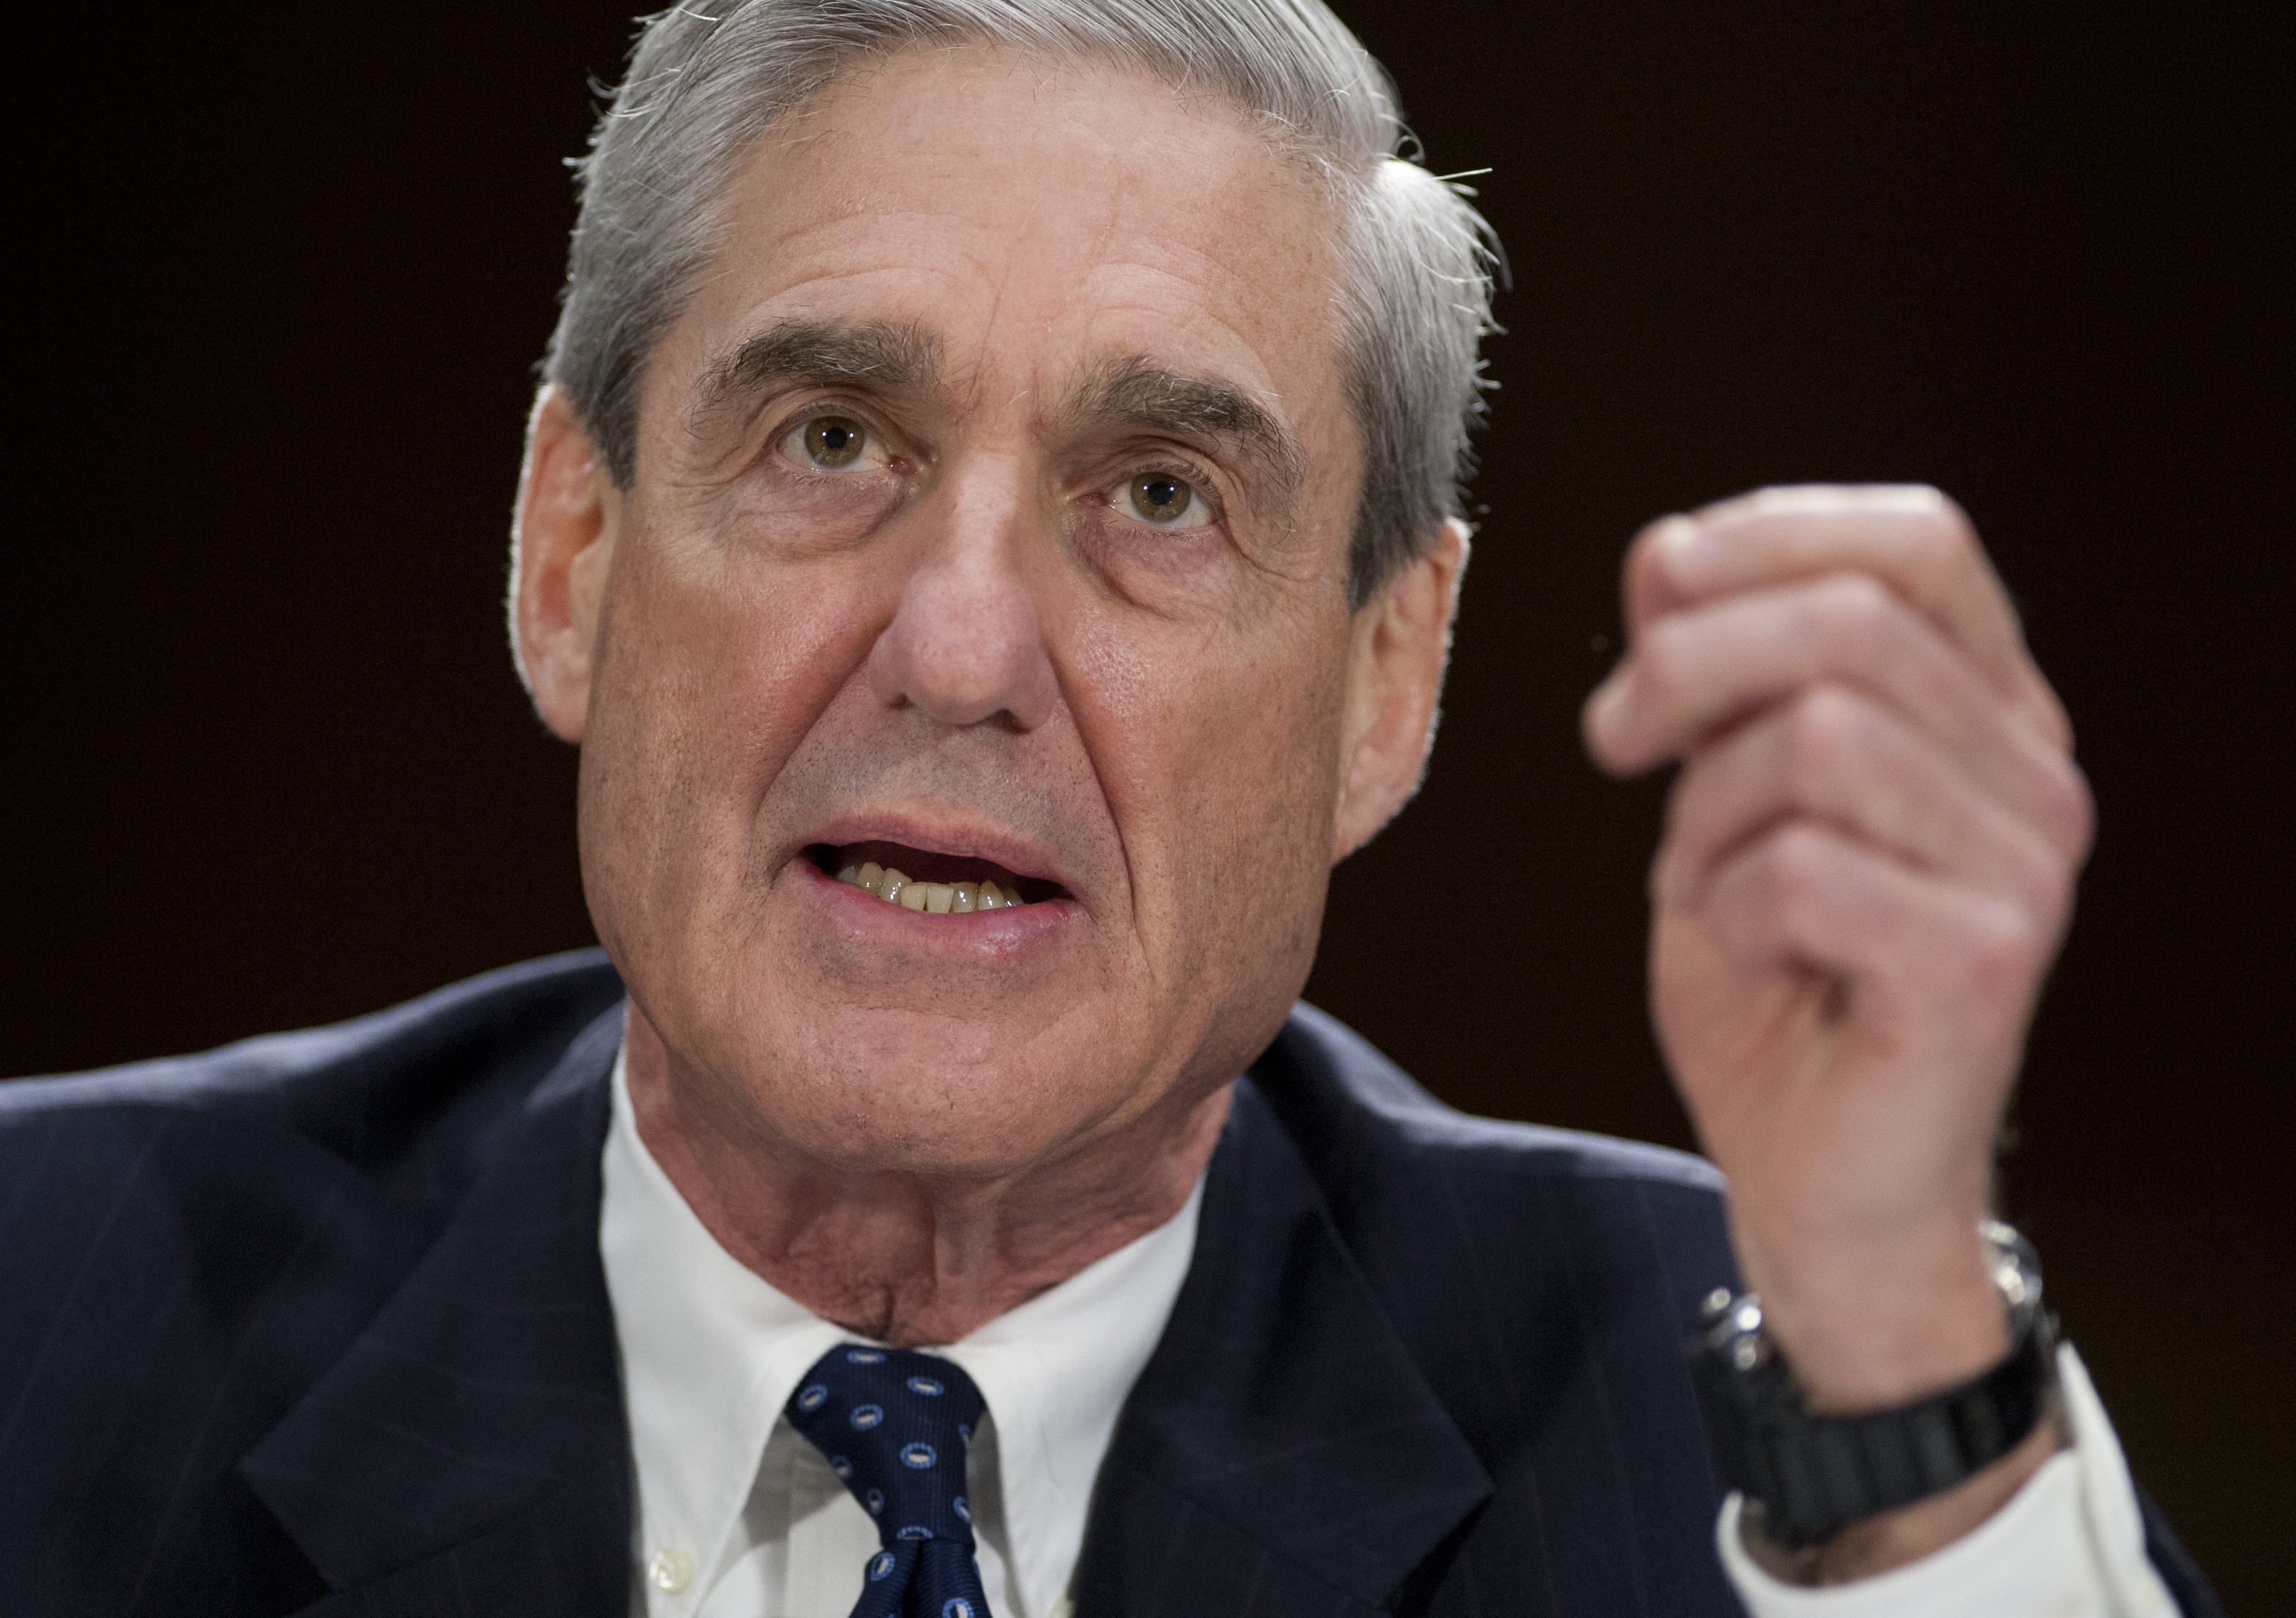 Federal Bureau of Investigation Director Robert Mueller testifies before the US Senate Judiciary Committee on oversight during a hearing on Capitol Hill in Washington, June 19, 2013. (Saul Loeb&mdash;AFP/Getty Images)